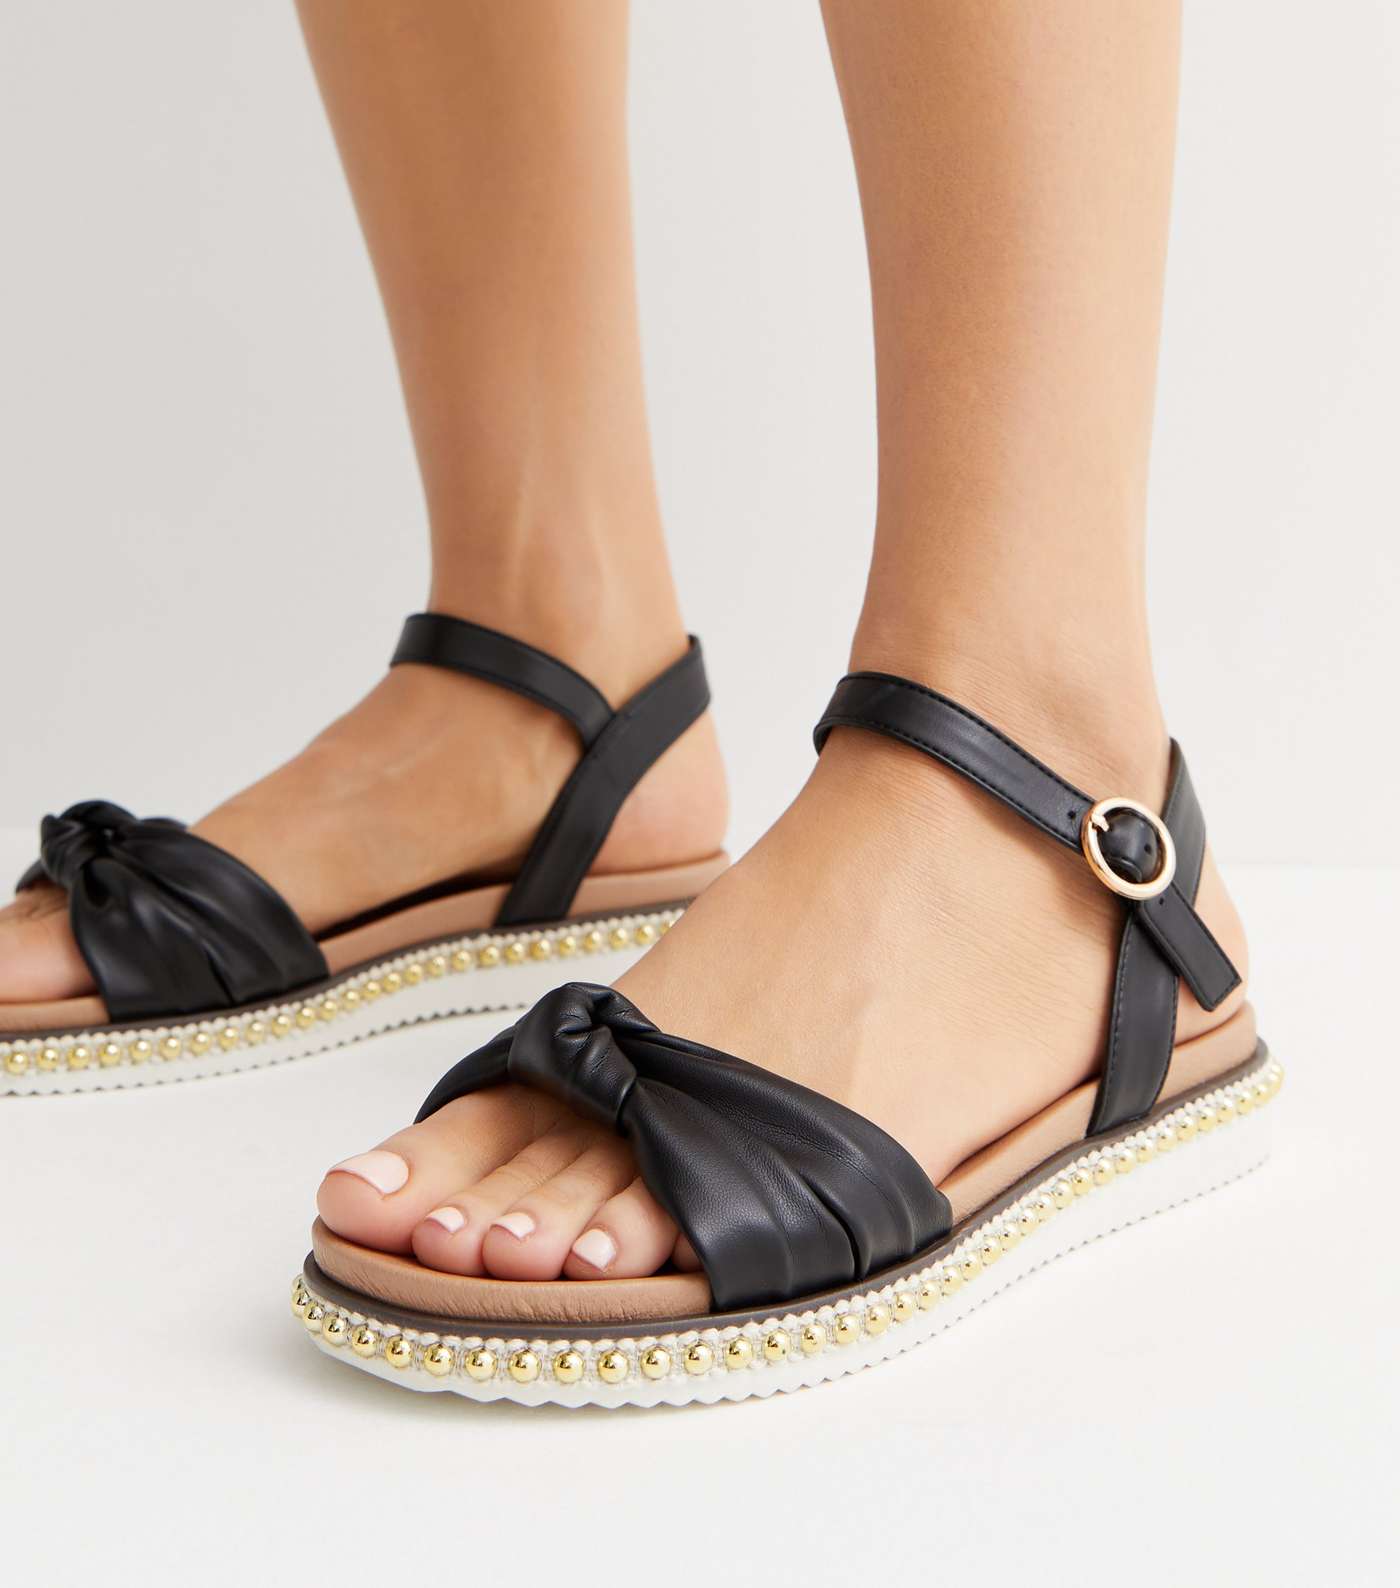 Wide Fit Black Leather-Look Beaded Footbed Sandals Image 2